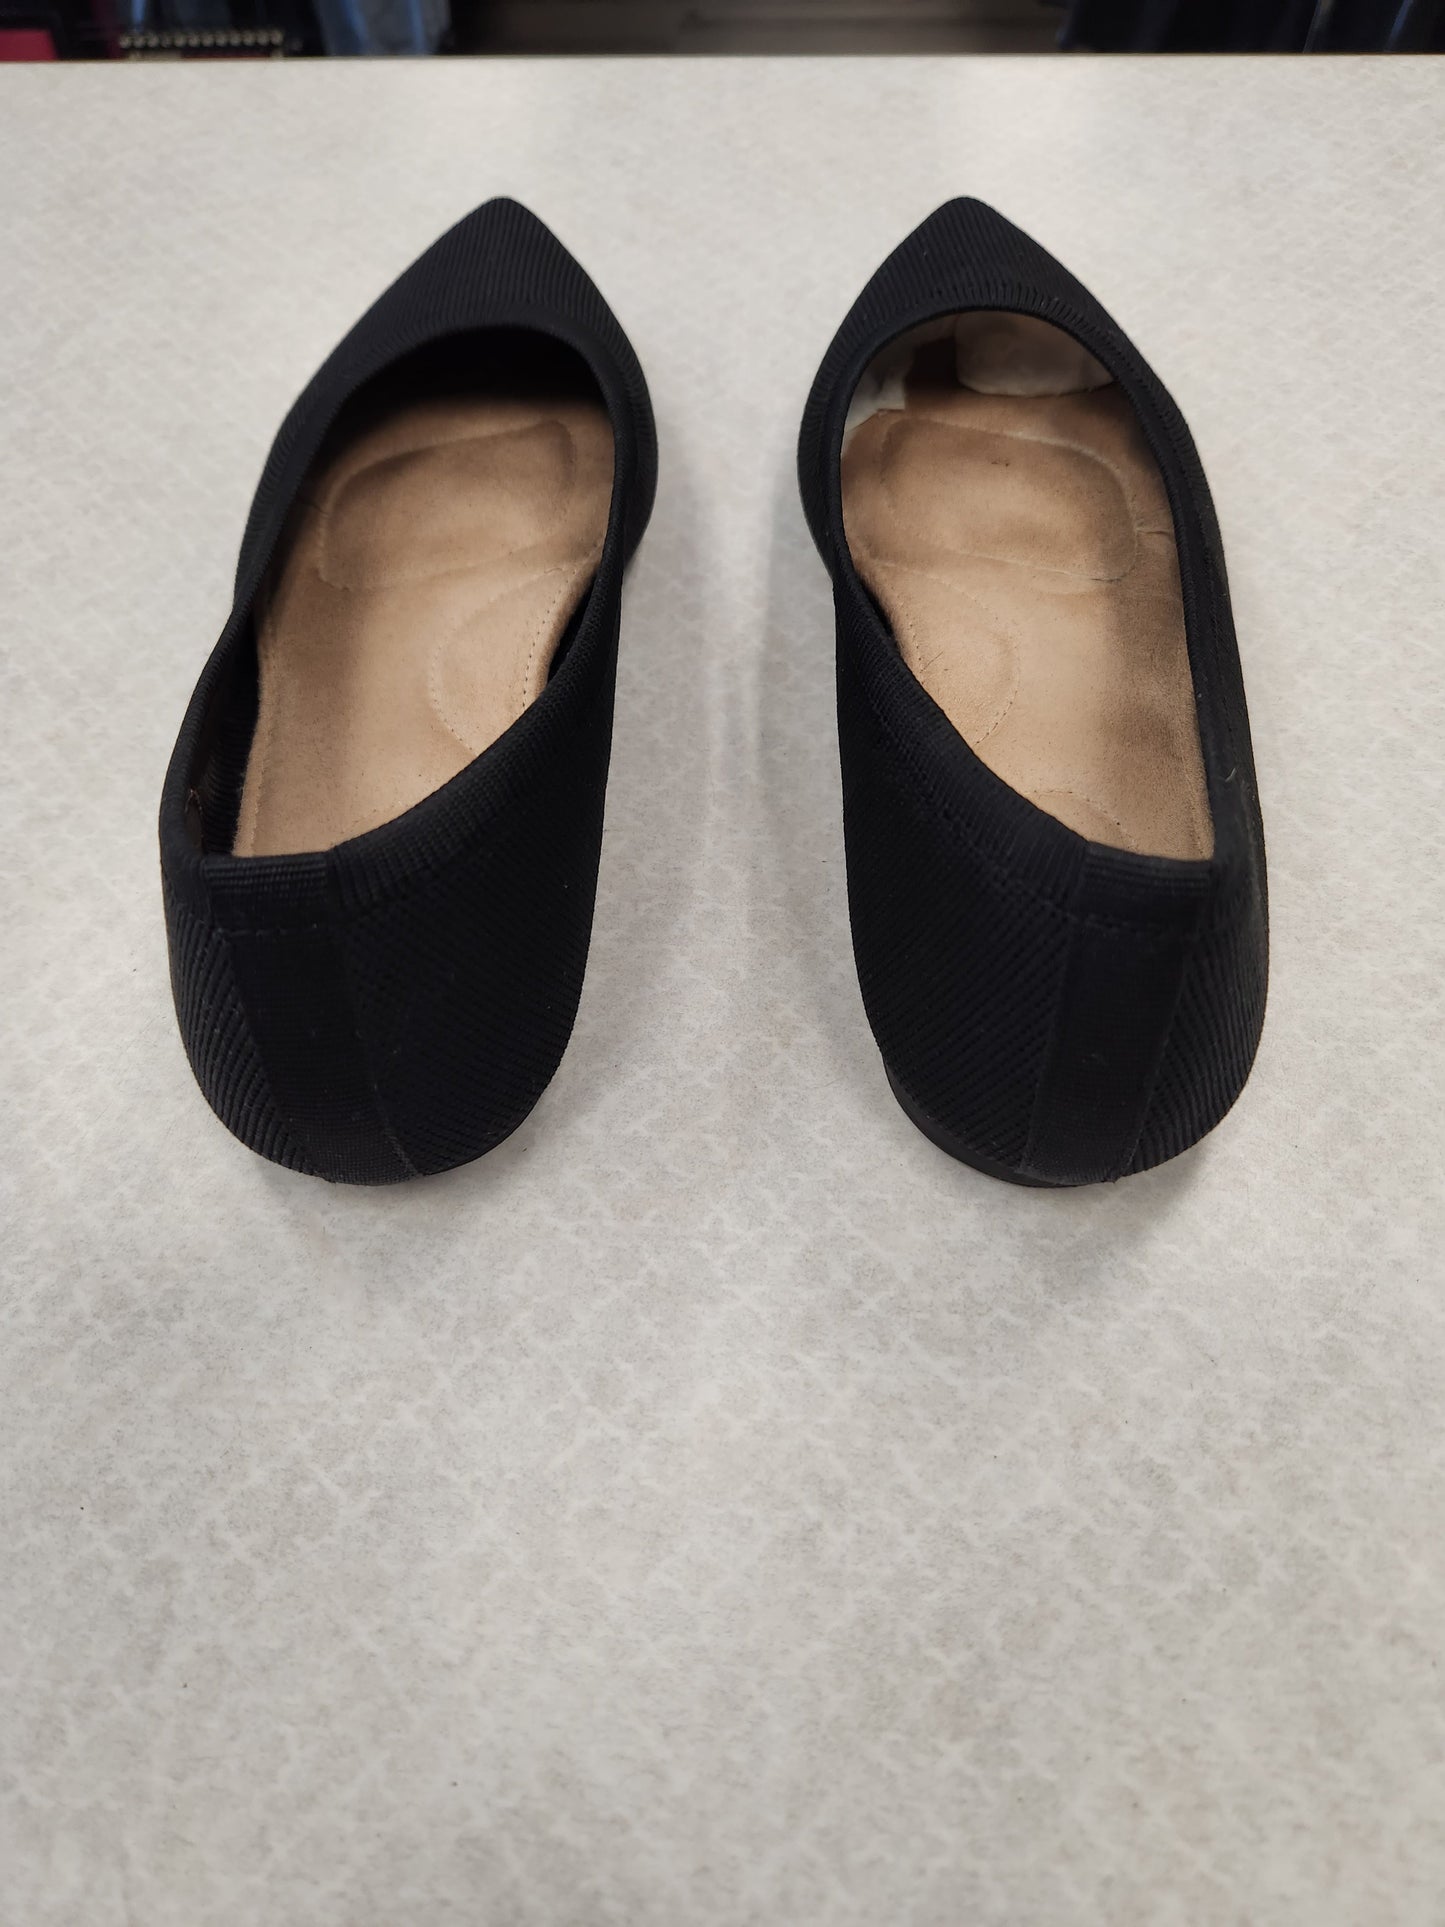 Shoes Flats By Old Navy  Size: 8